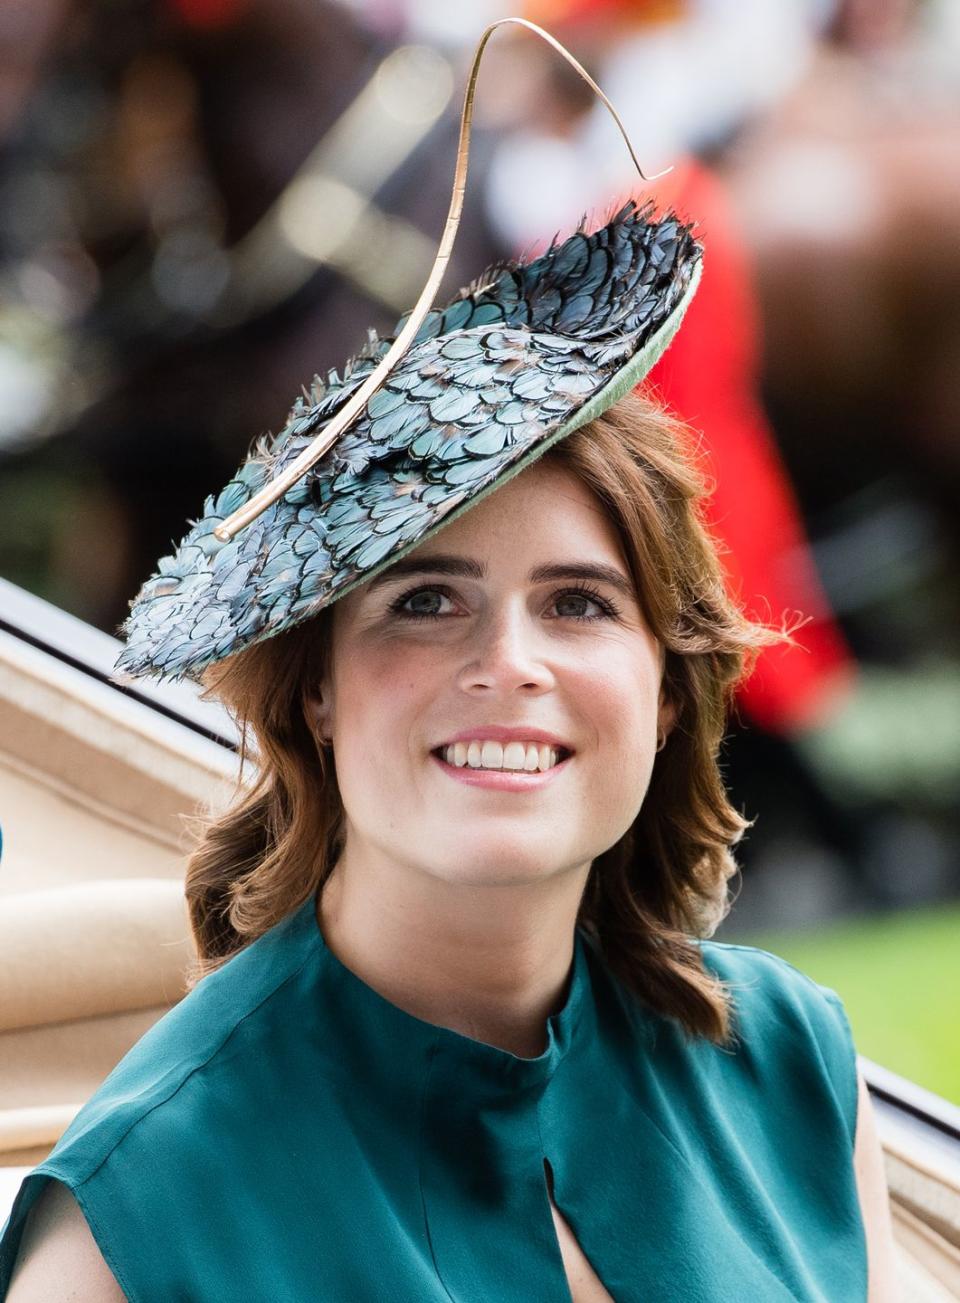 Blue Was the Royal Family's Signature Color at Ascot This Year